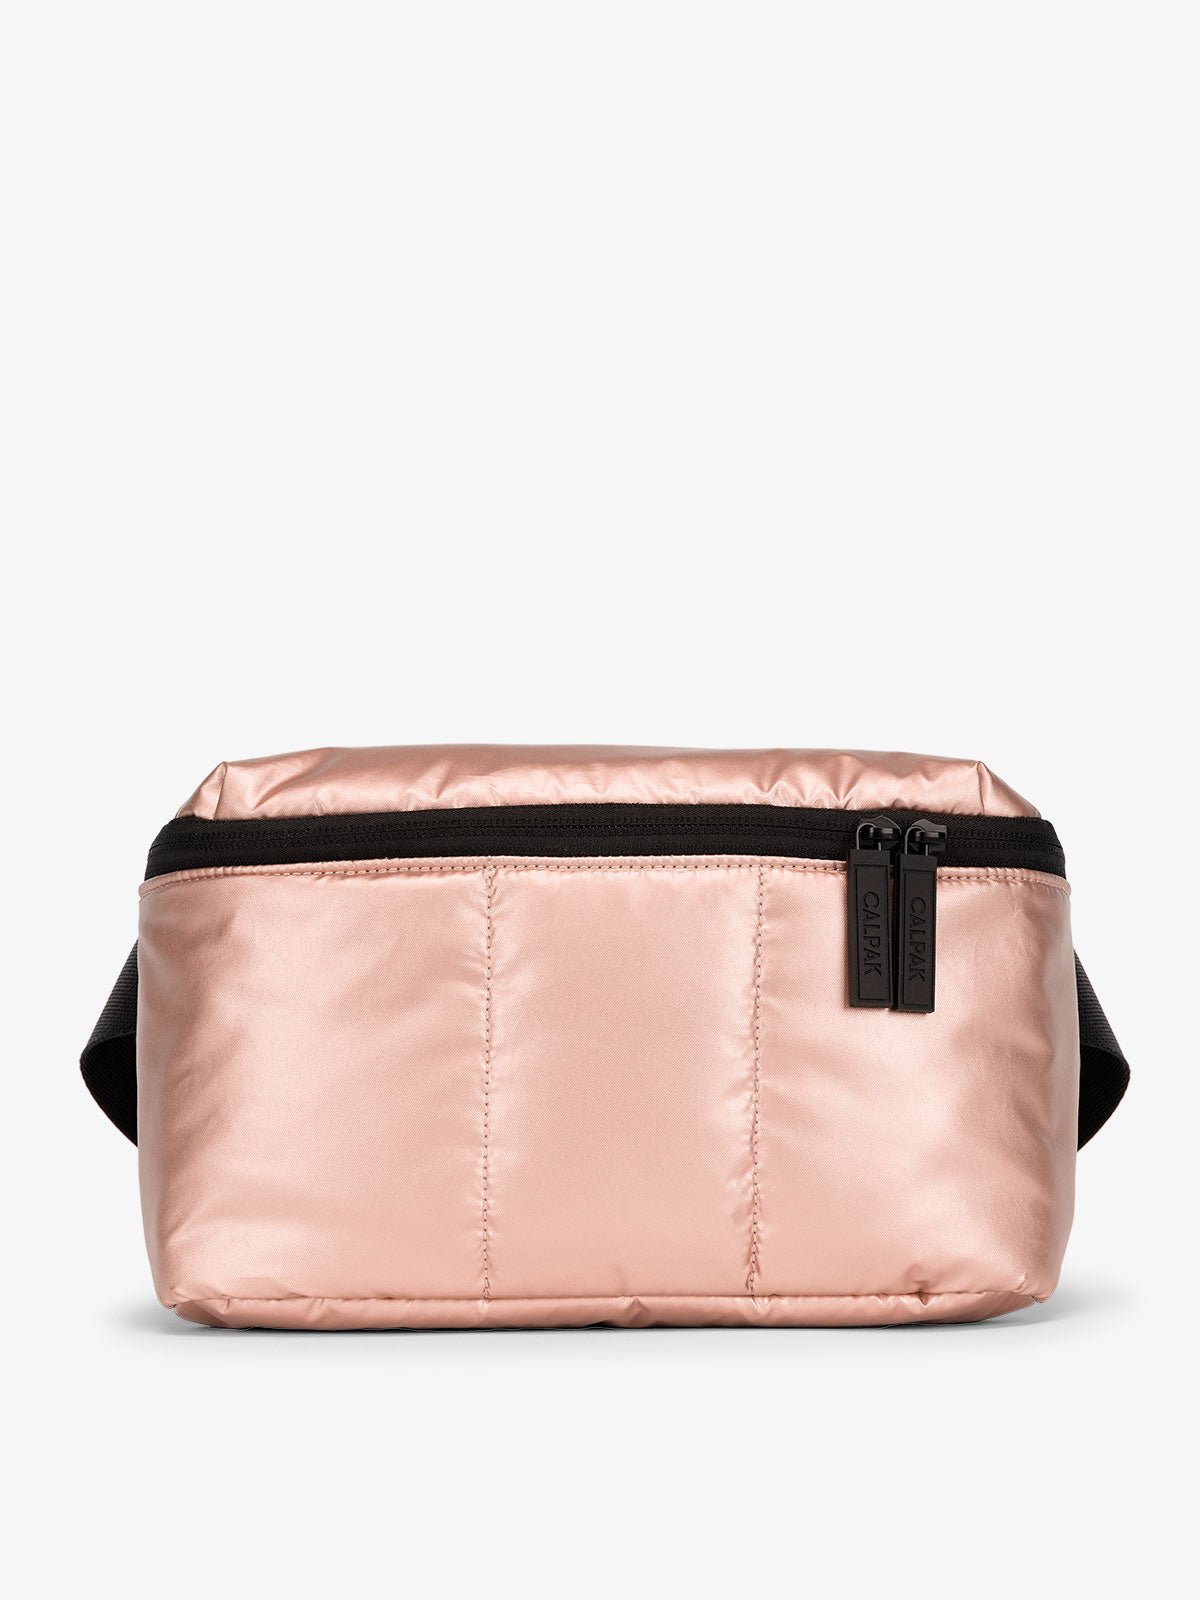 CALPAK Luka Belt Bag with soft puffy exterior in pink rose gold